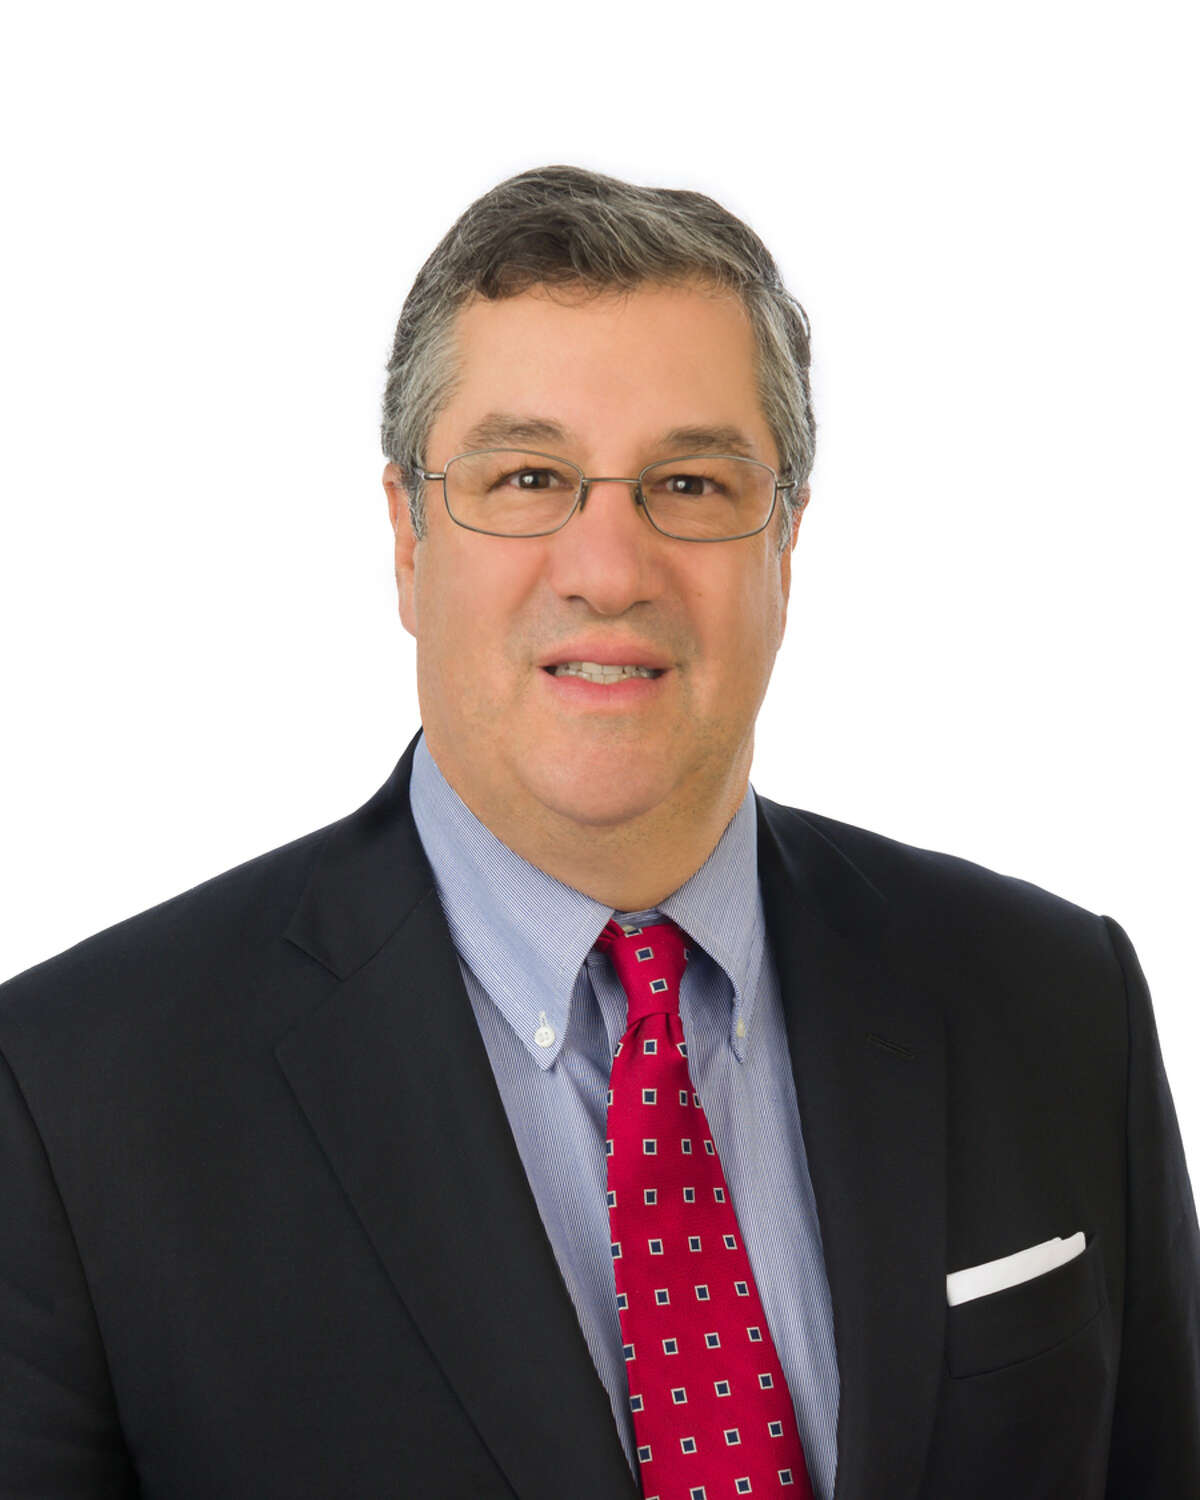 Robert E. Mallozzi III has been named to the board of directors of the Western Connecticut Economic Development District. — Robert E. Mallozzi III / Contributed photo